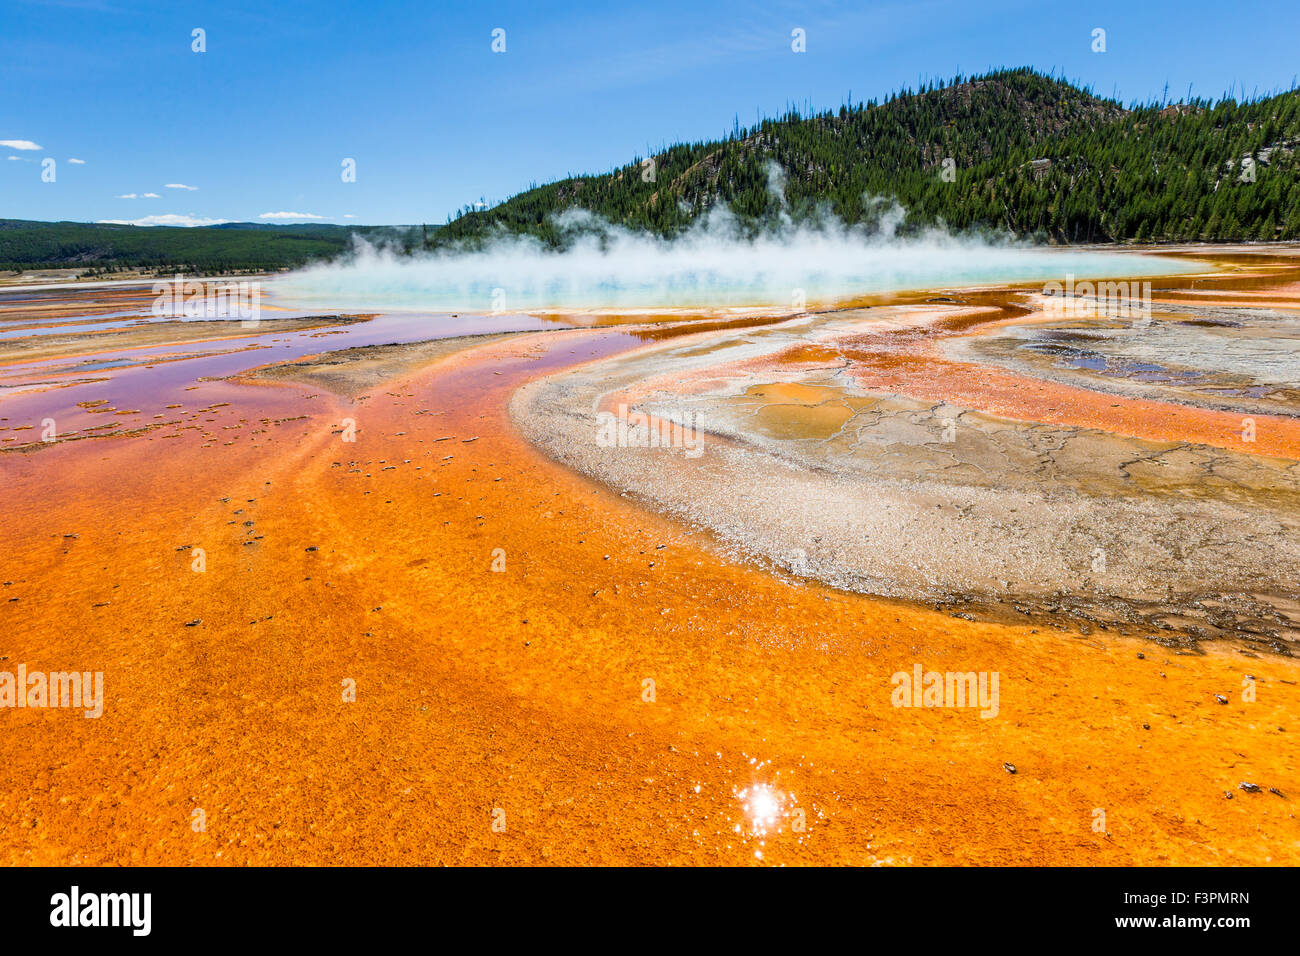 Grand Prismatic Spring; Midway Geyser Basin, il Parco Nazionale di Yellowstone, Wyoming USA Foto Stock